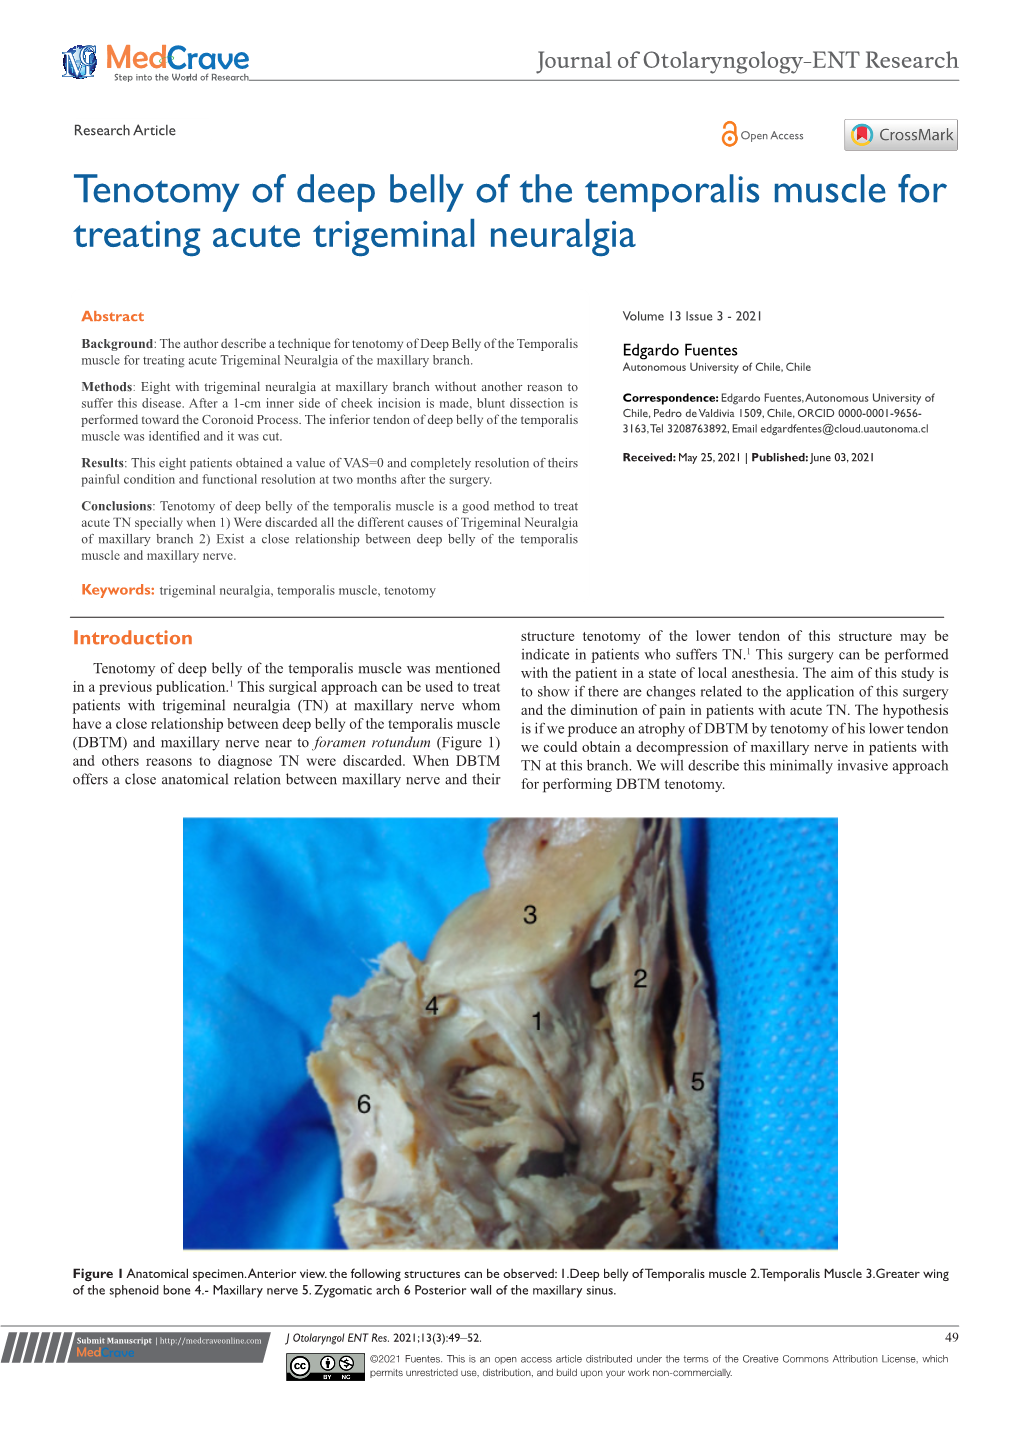 Tenotomy of Deep Belly of the Temporalis Muscle for Treating Acute Trigeminal Neuralgia